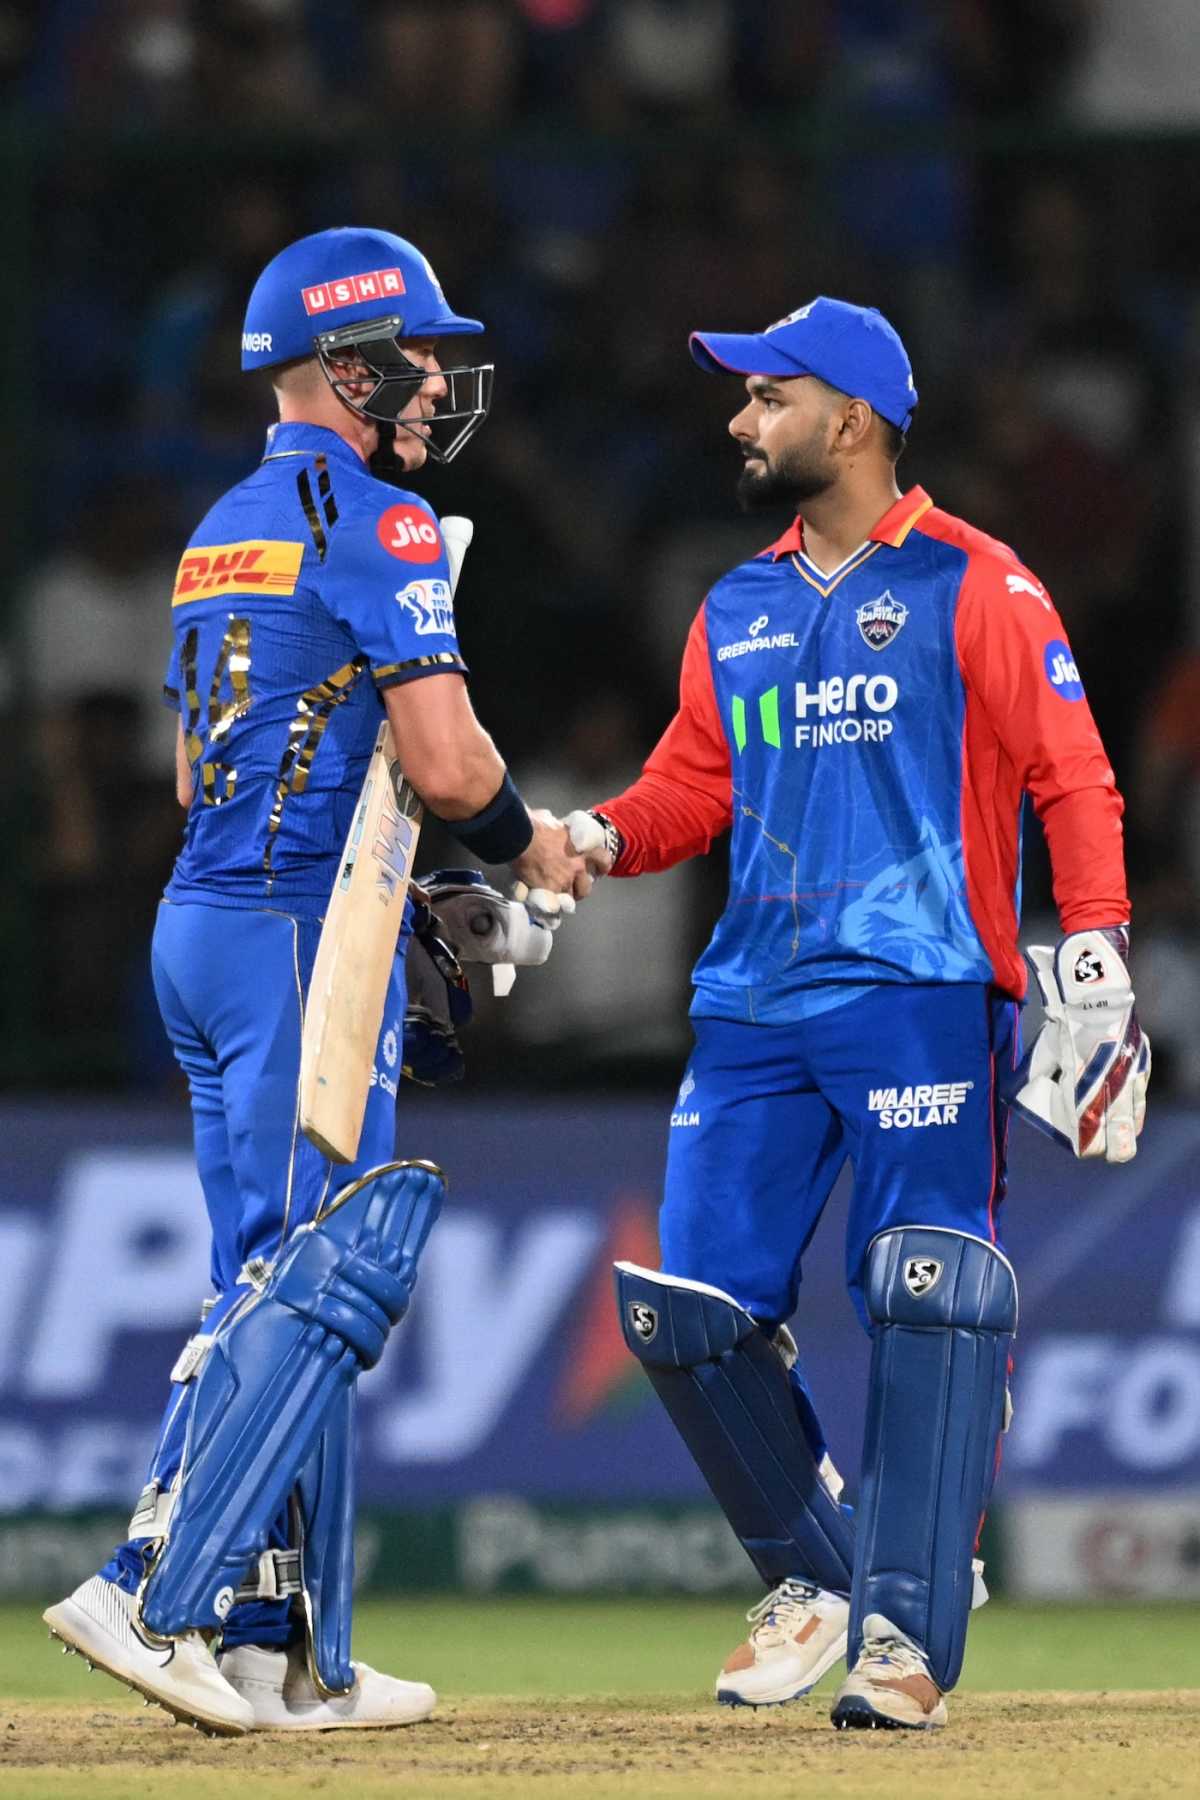 That's that - Capitals rise to fifth, while Mumbai Indians stay at ninth